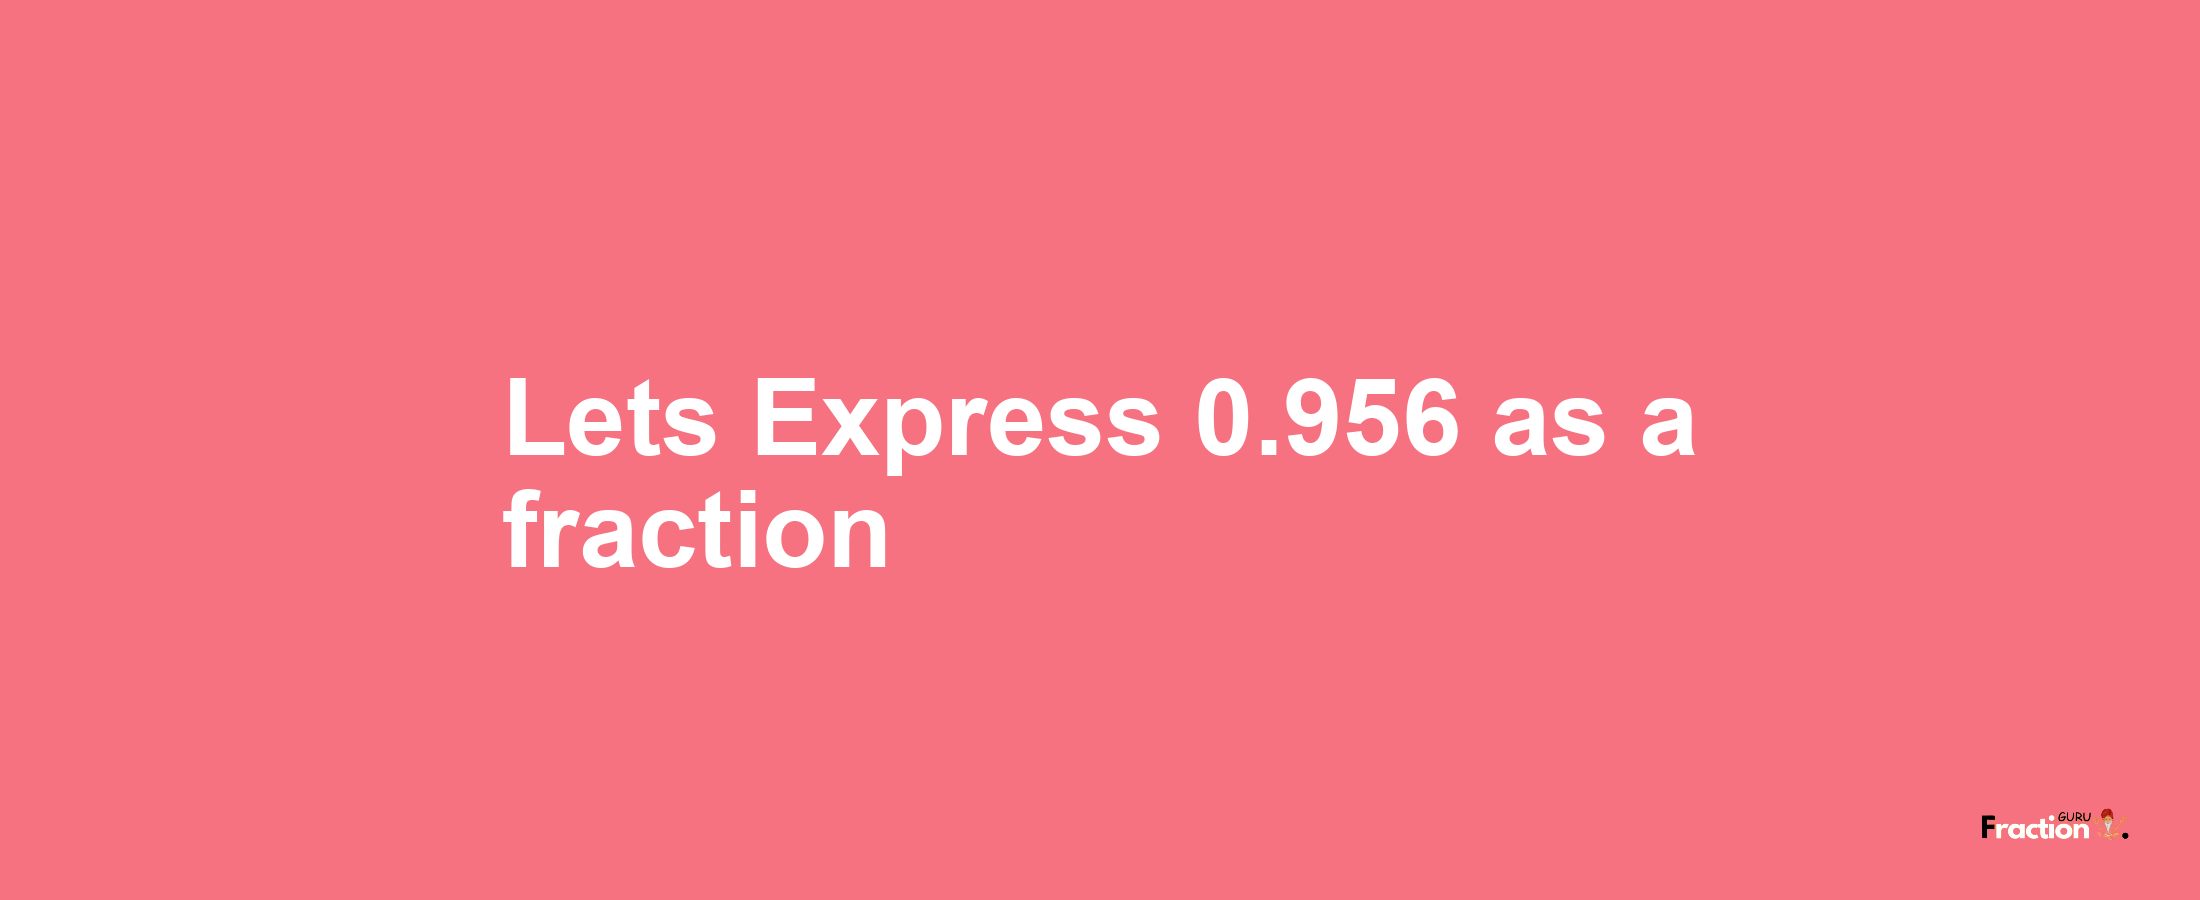 Lets Express 0.956 as afraction